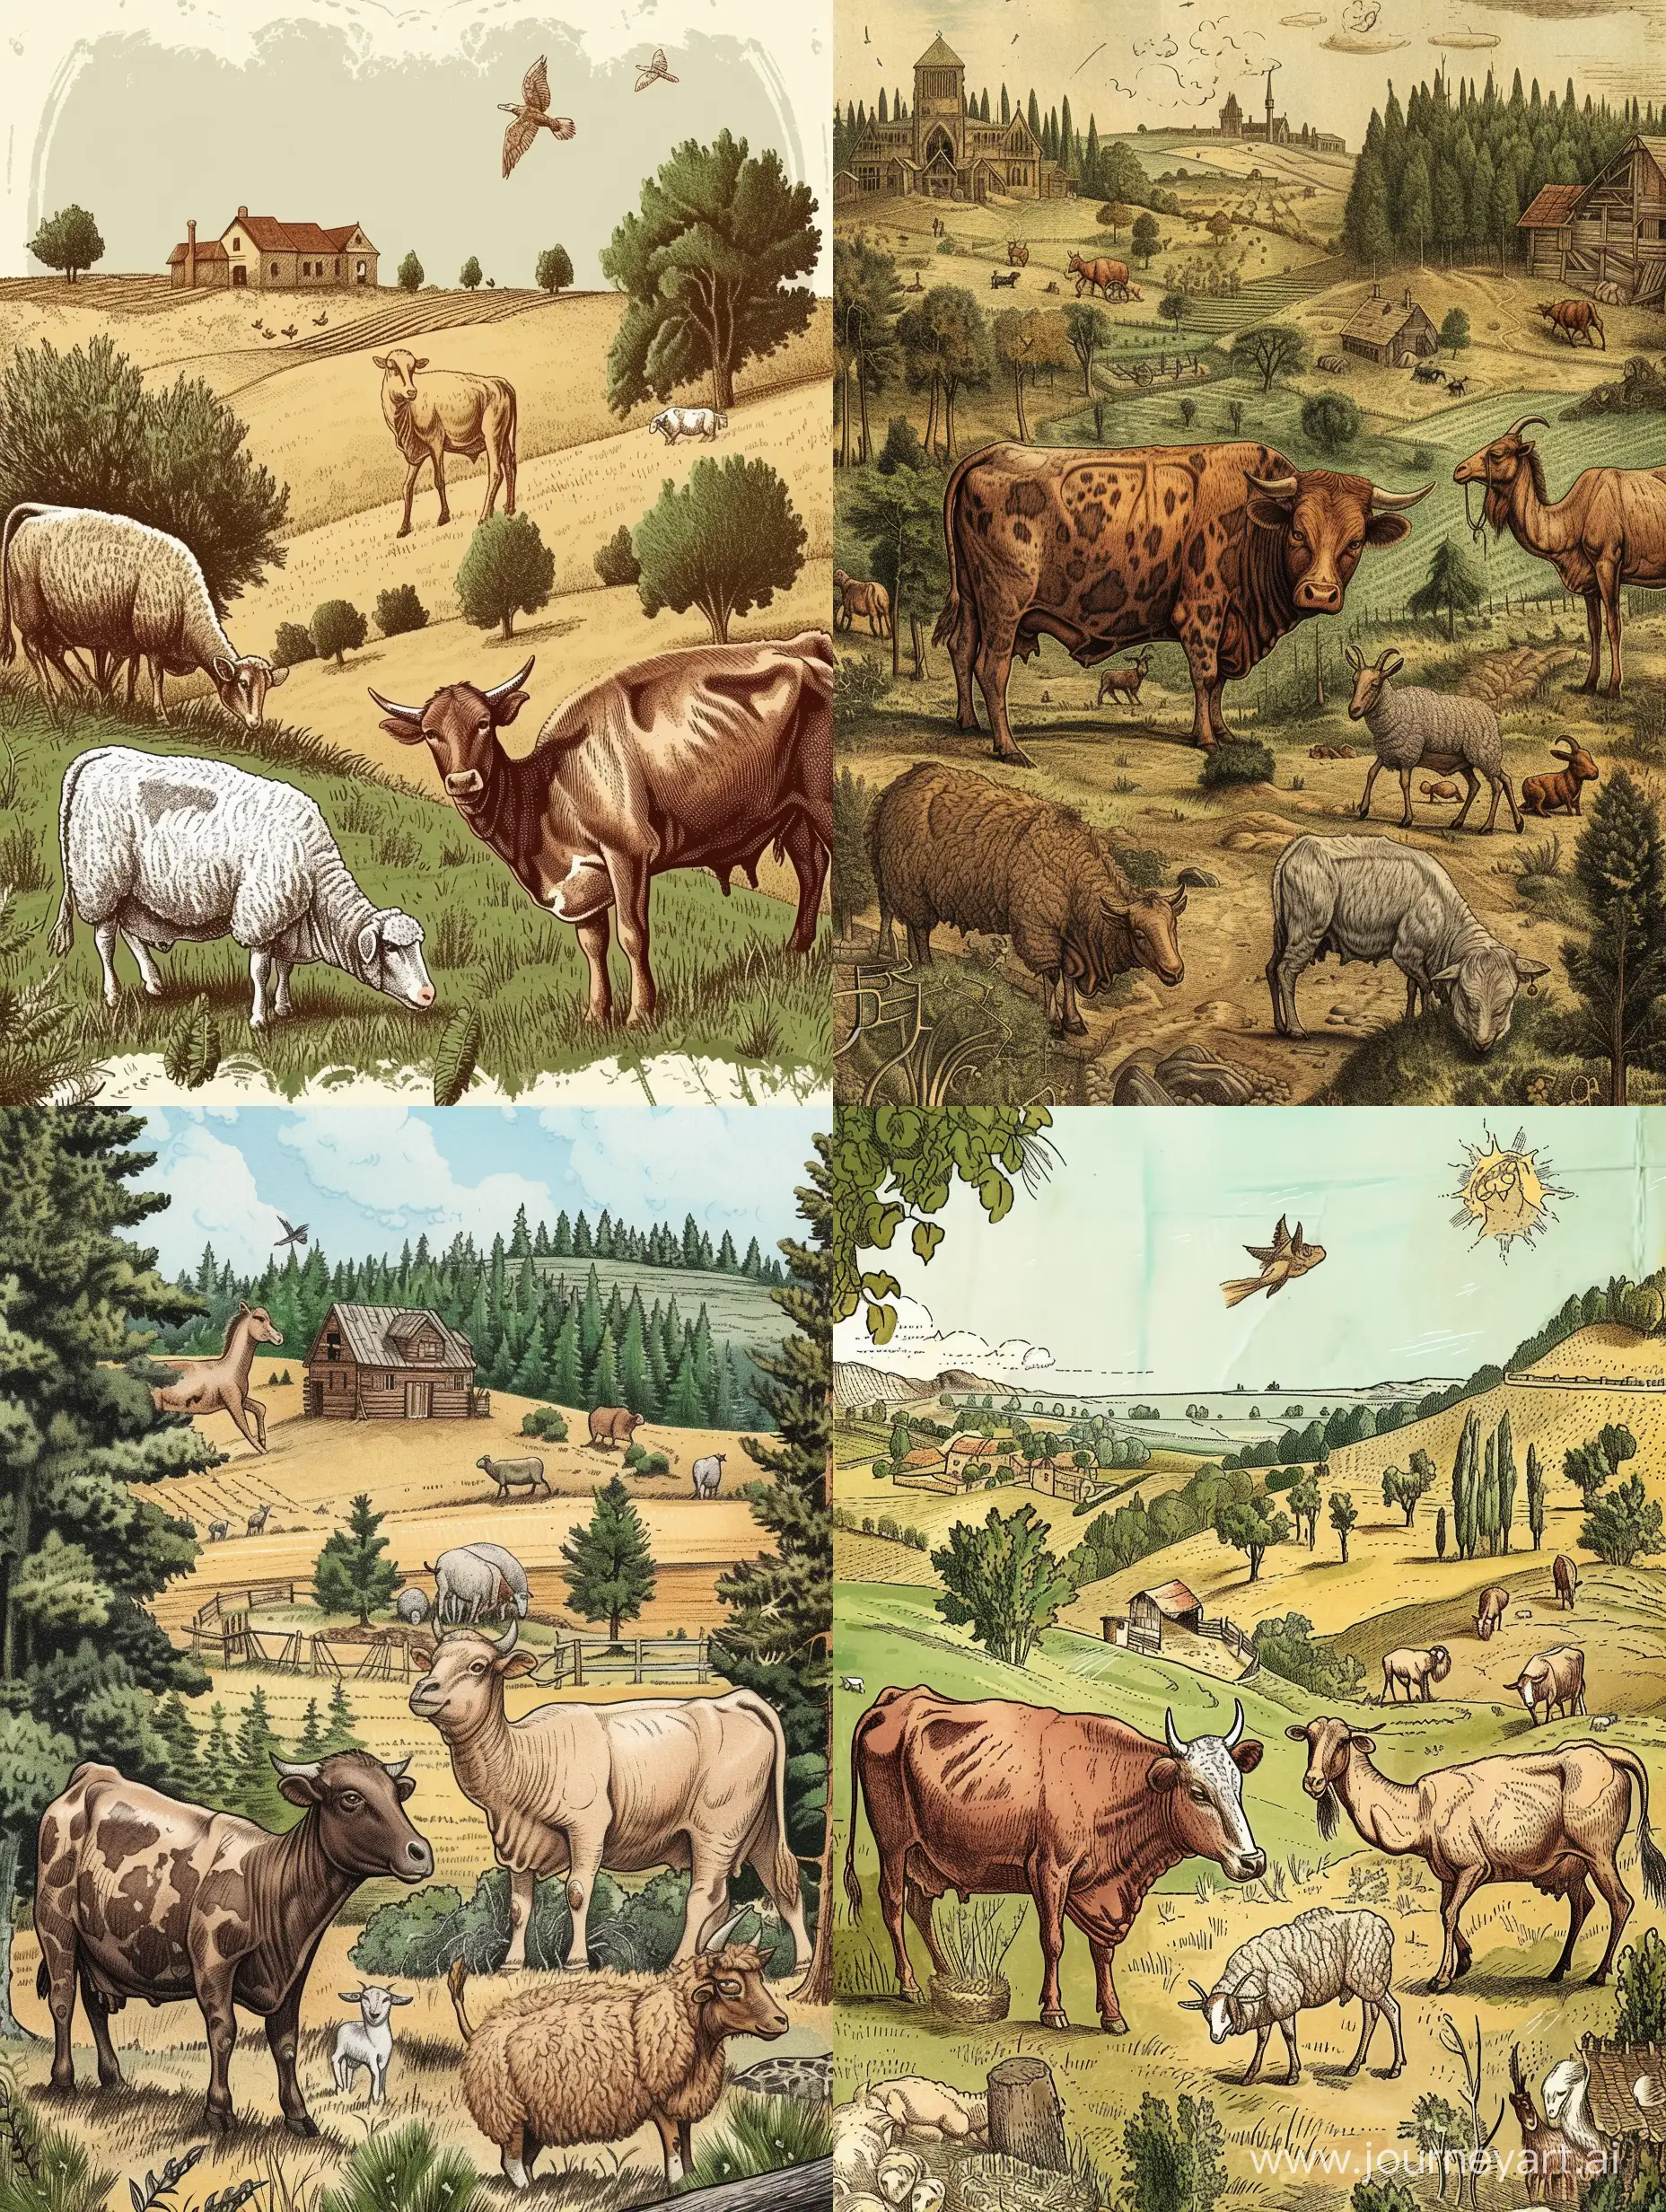 a cow a sheep a goat a camel and a bull in a farm there are some trees in the field in old style illustration, highly detailed, cs 5:7

